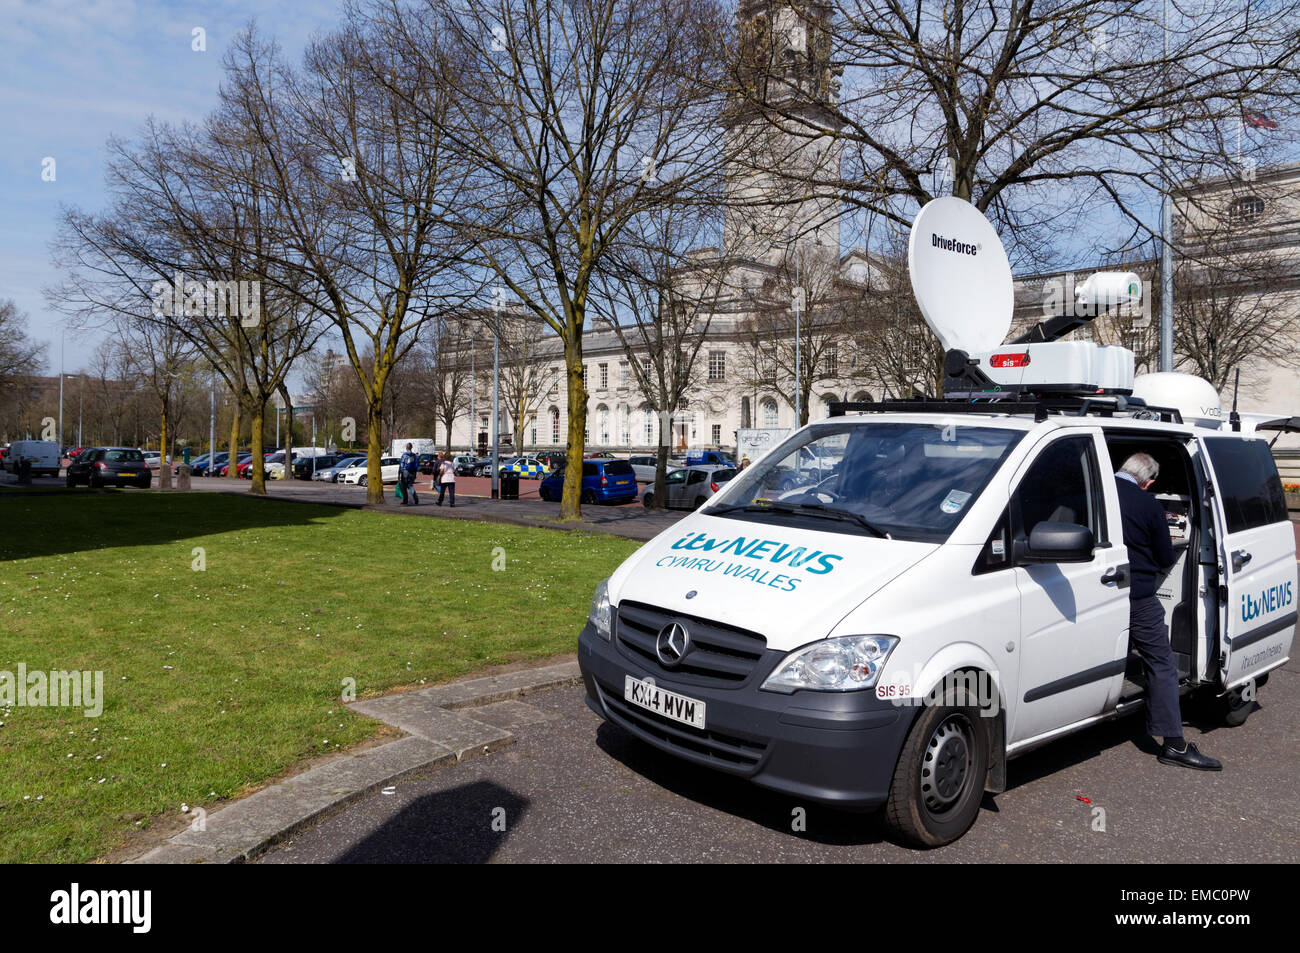 Outside Broadcast vehicle besides Cardiff Crown Court with Cardiff City Hall in distance, Cathays Park, Cardiff, South Wales. Stock Photo